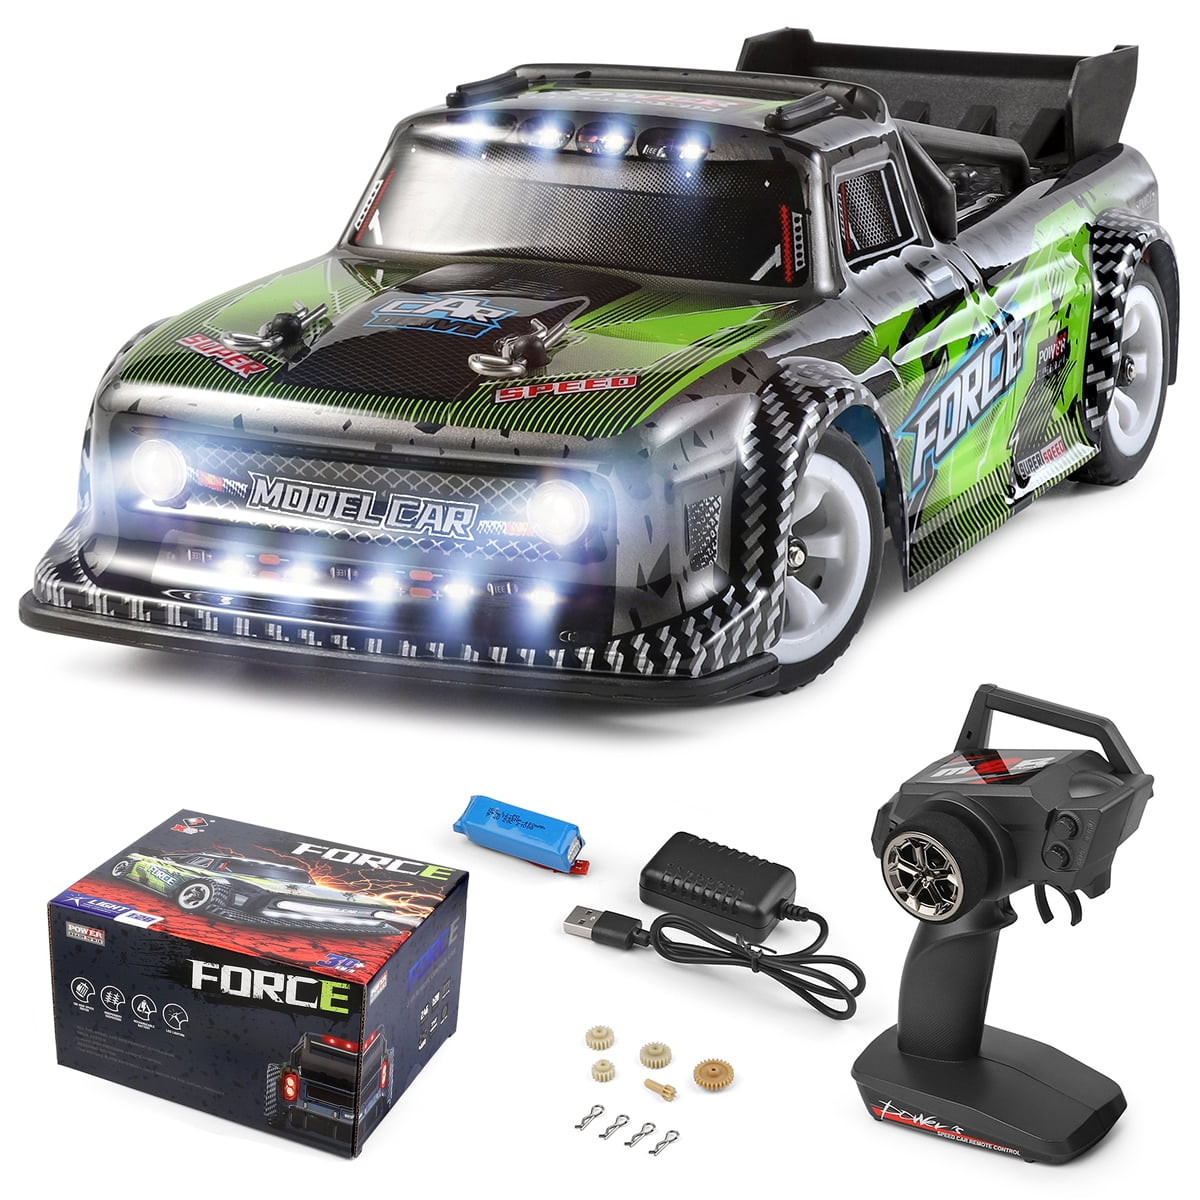 NKOK RC Sonic SSAS R2 Car With Lights Blue 614 for sale online 